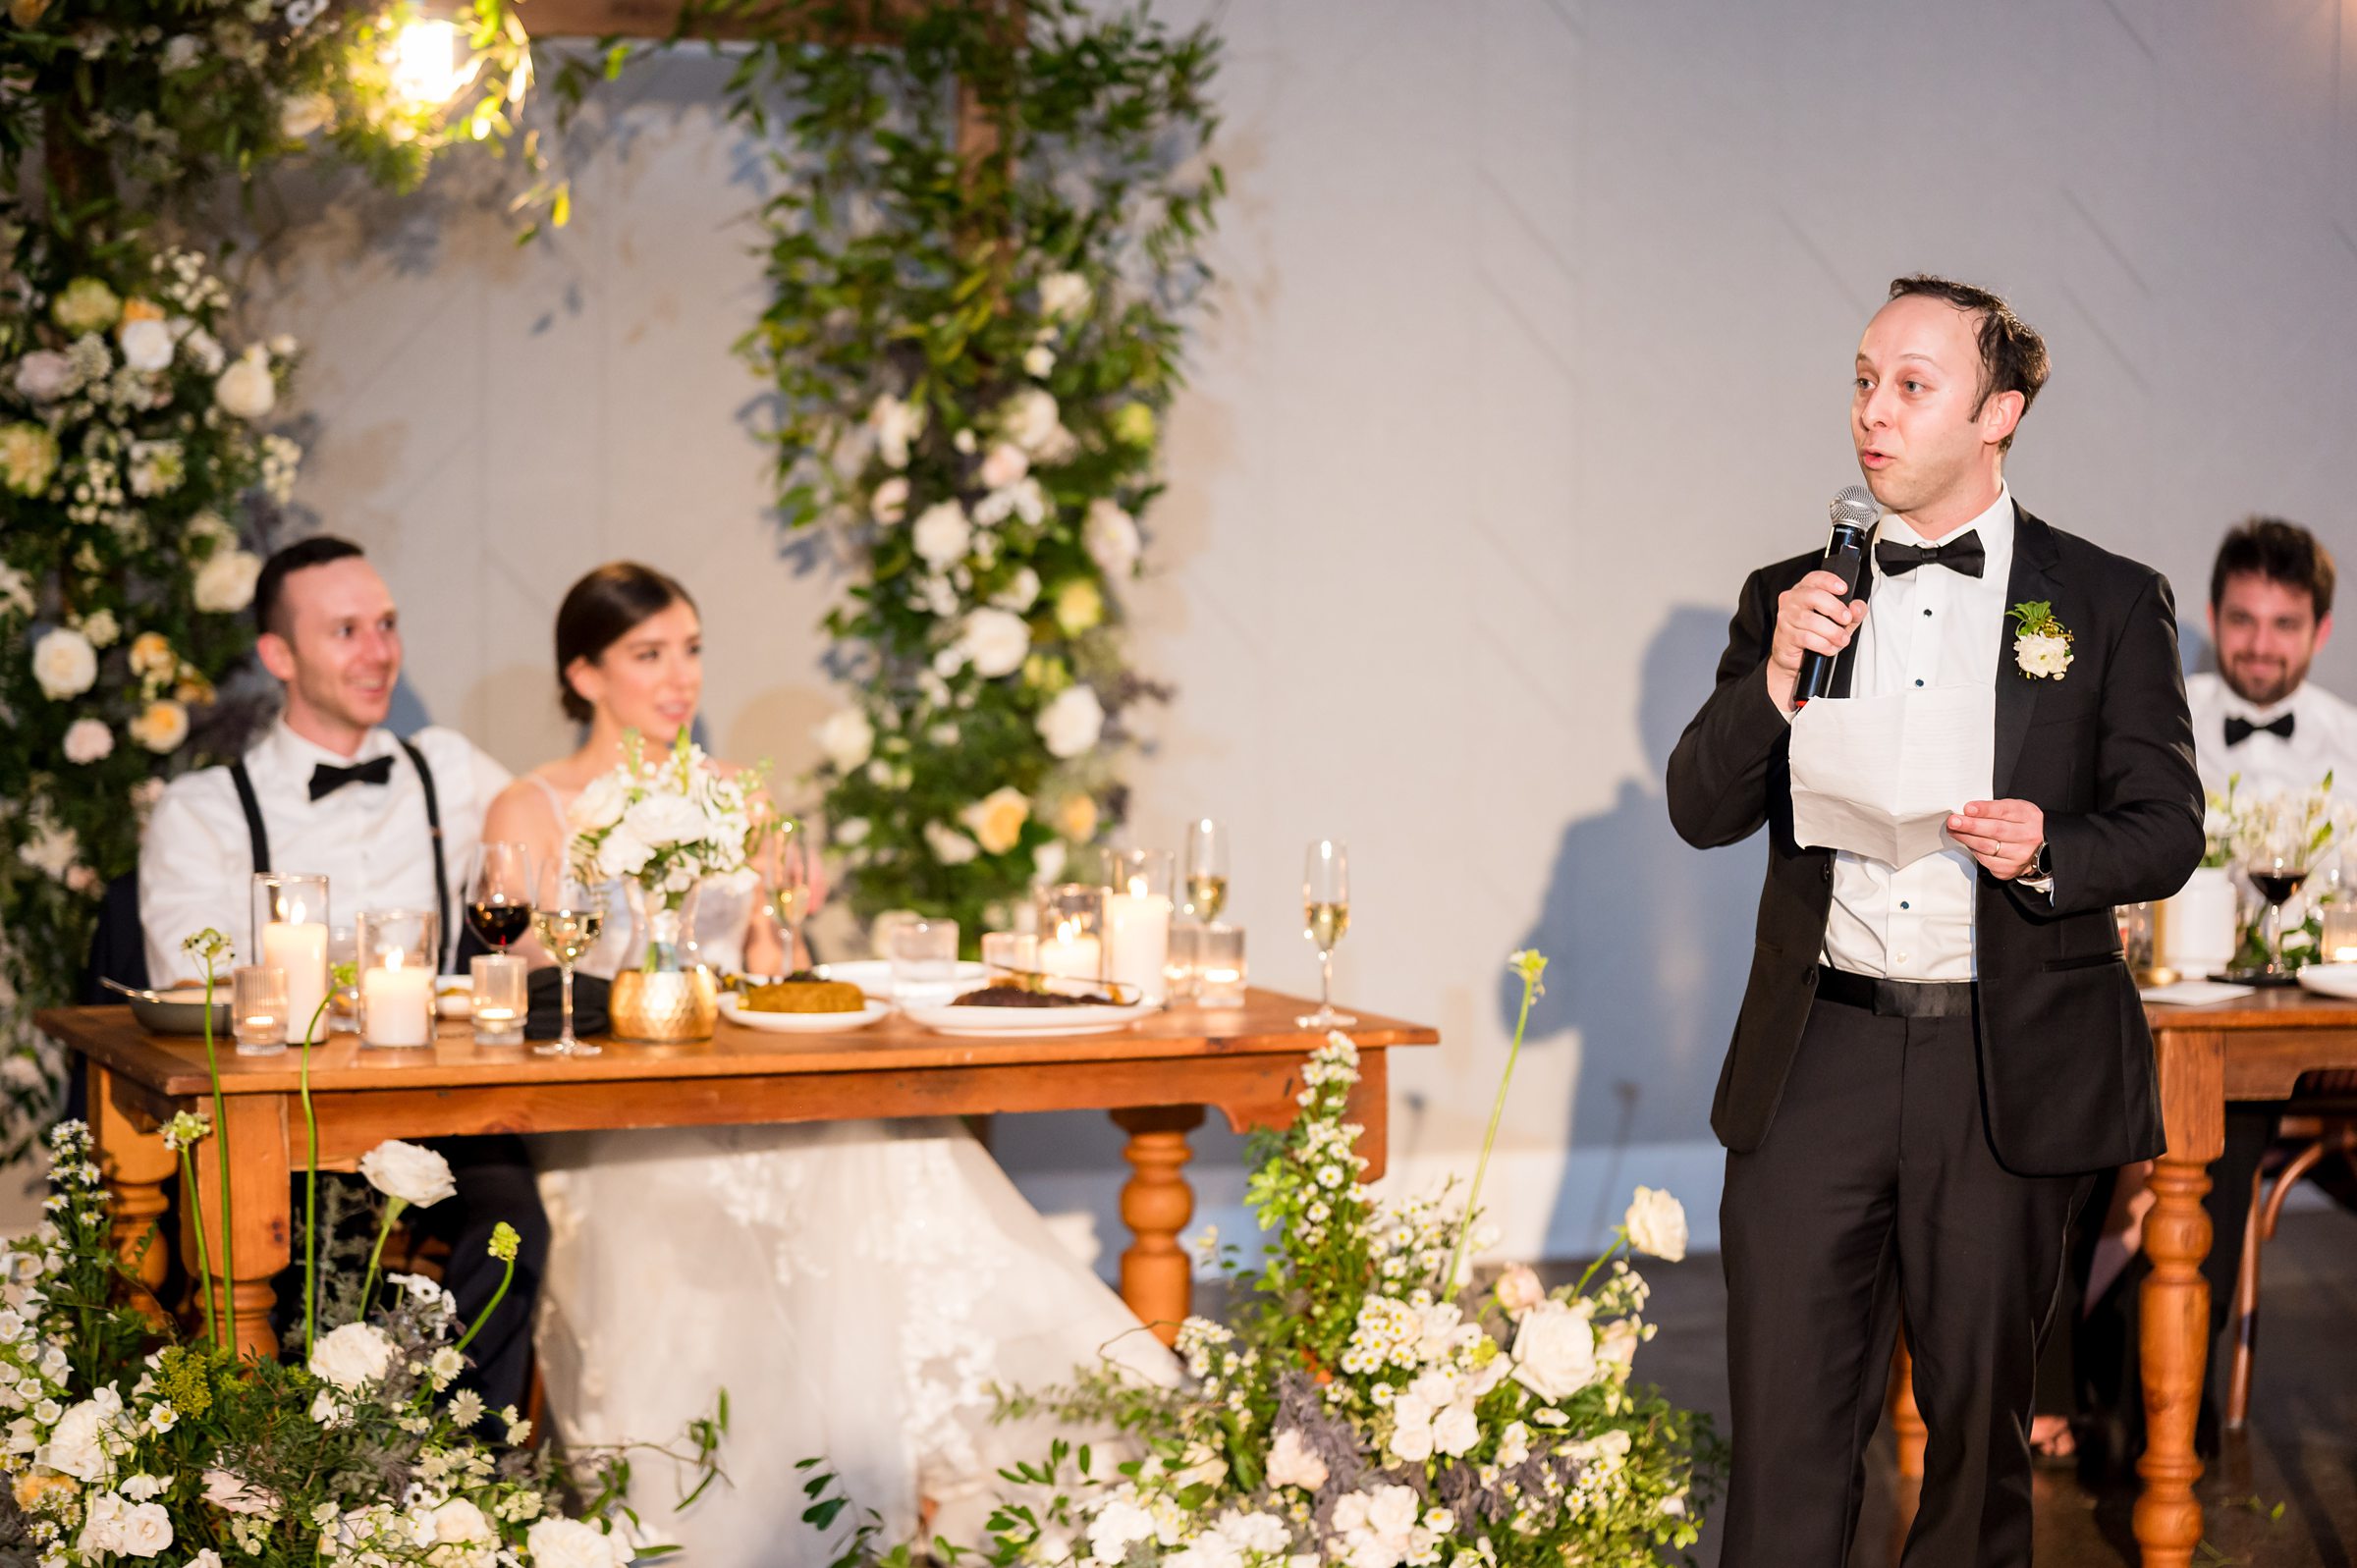 At the Lilah Events wedding, the bride and groom captivated their guests with a heartfelt speech at their reception.